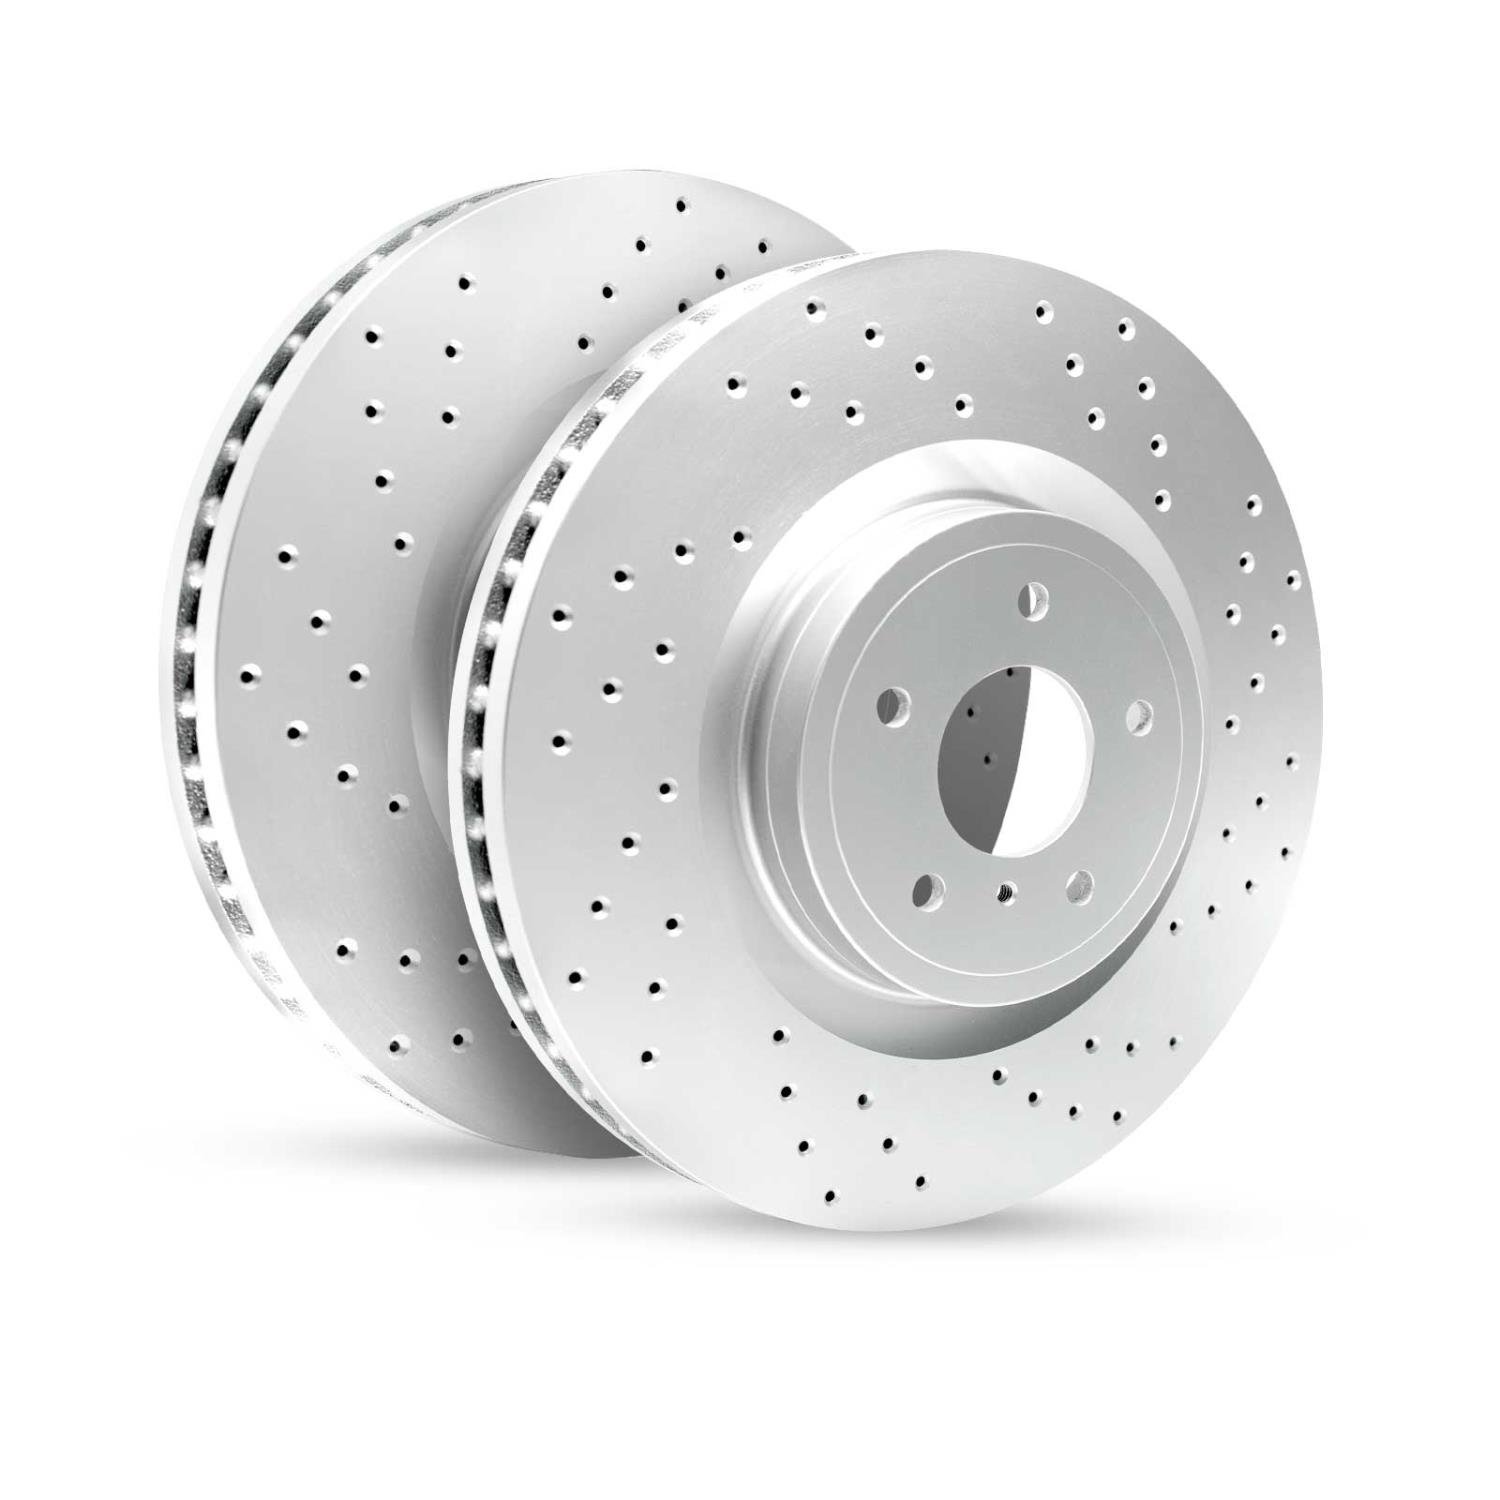 GEO-Carbon Drilled/Slotted Rotors, 2007-2019 BMW, Position: Rear